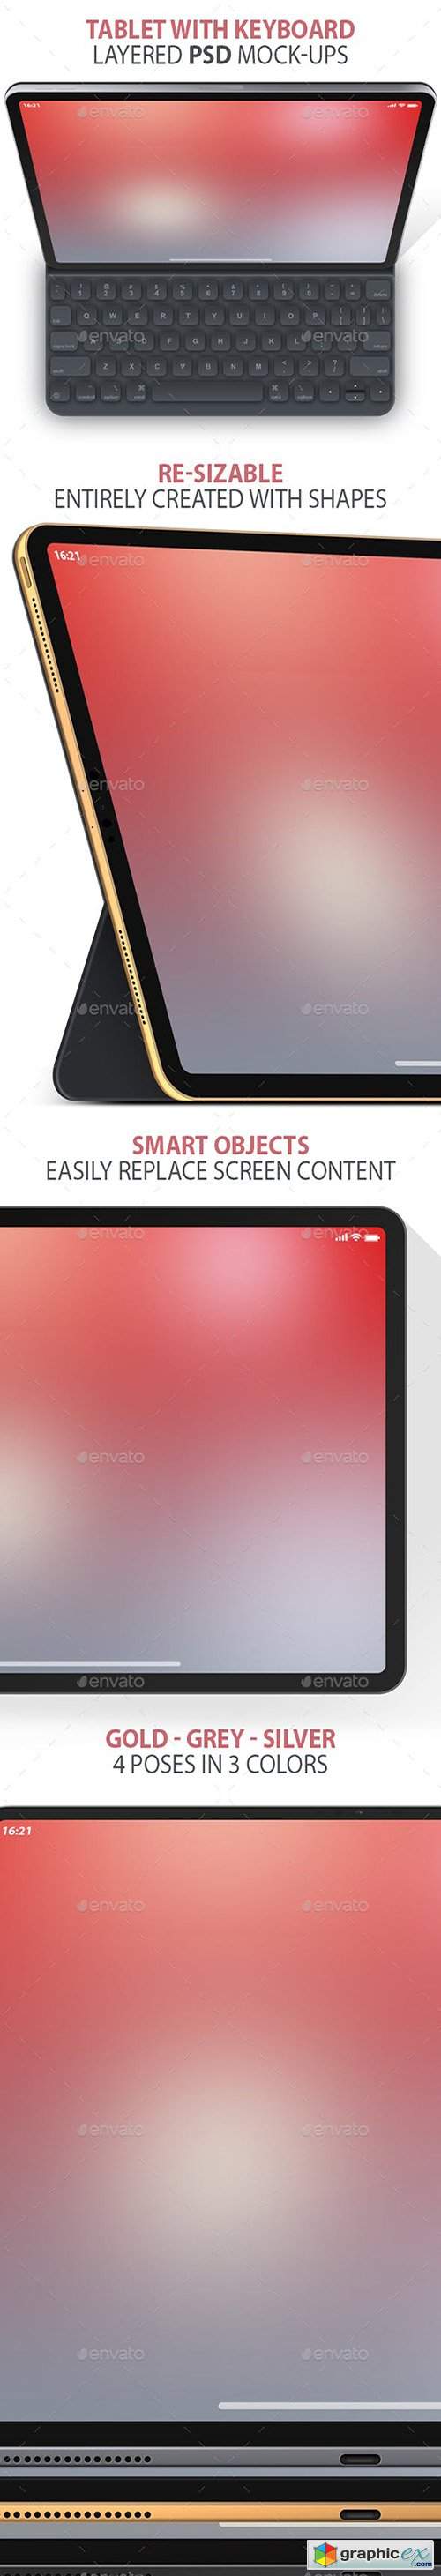 Clean Tablet Layered PSD Mock-ups